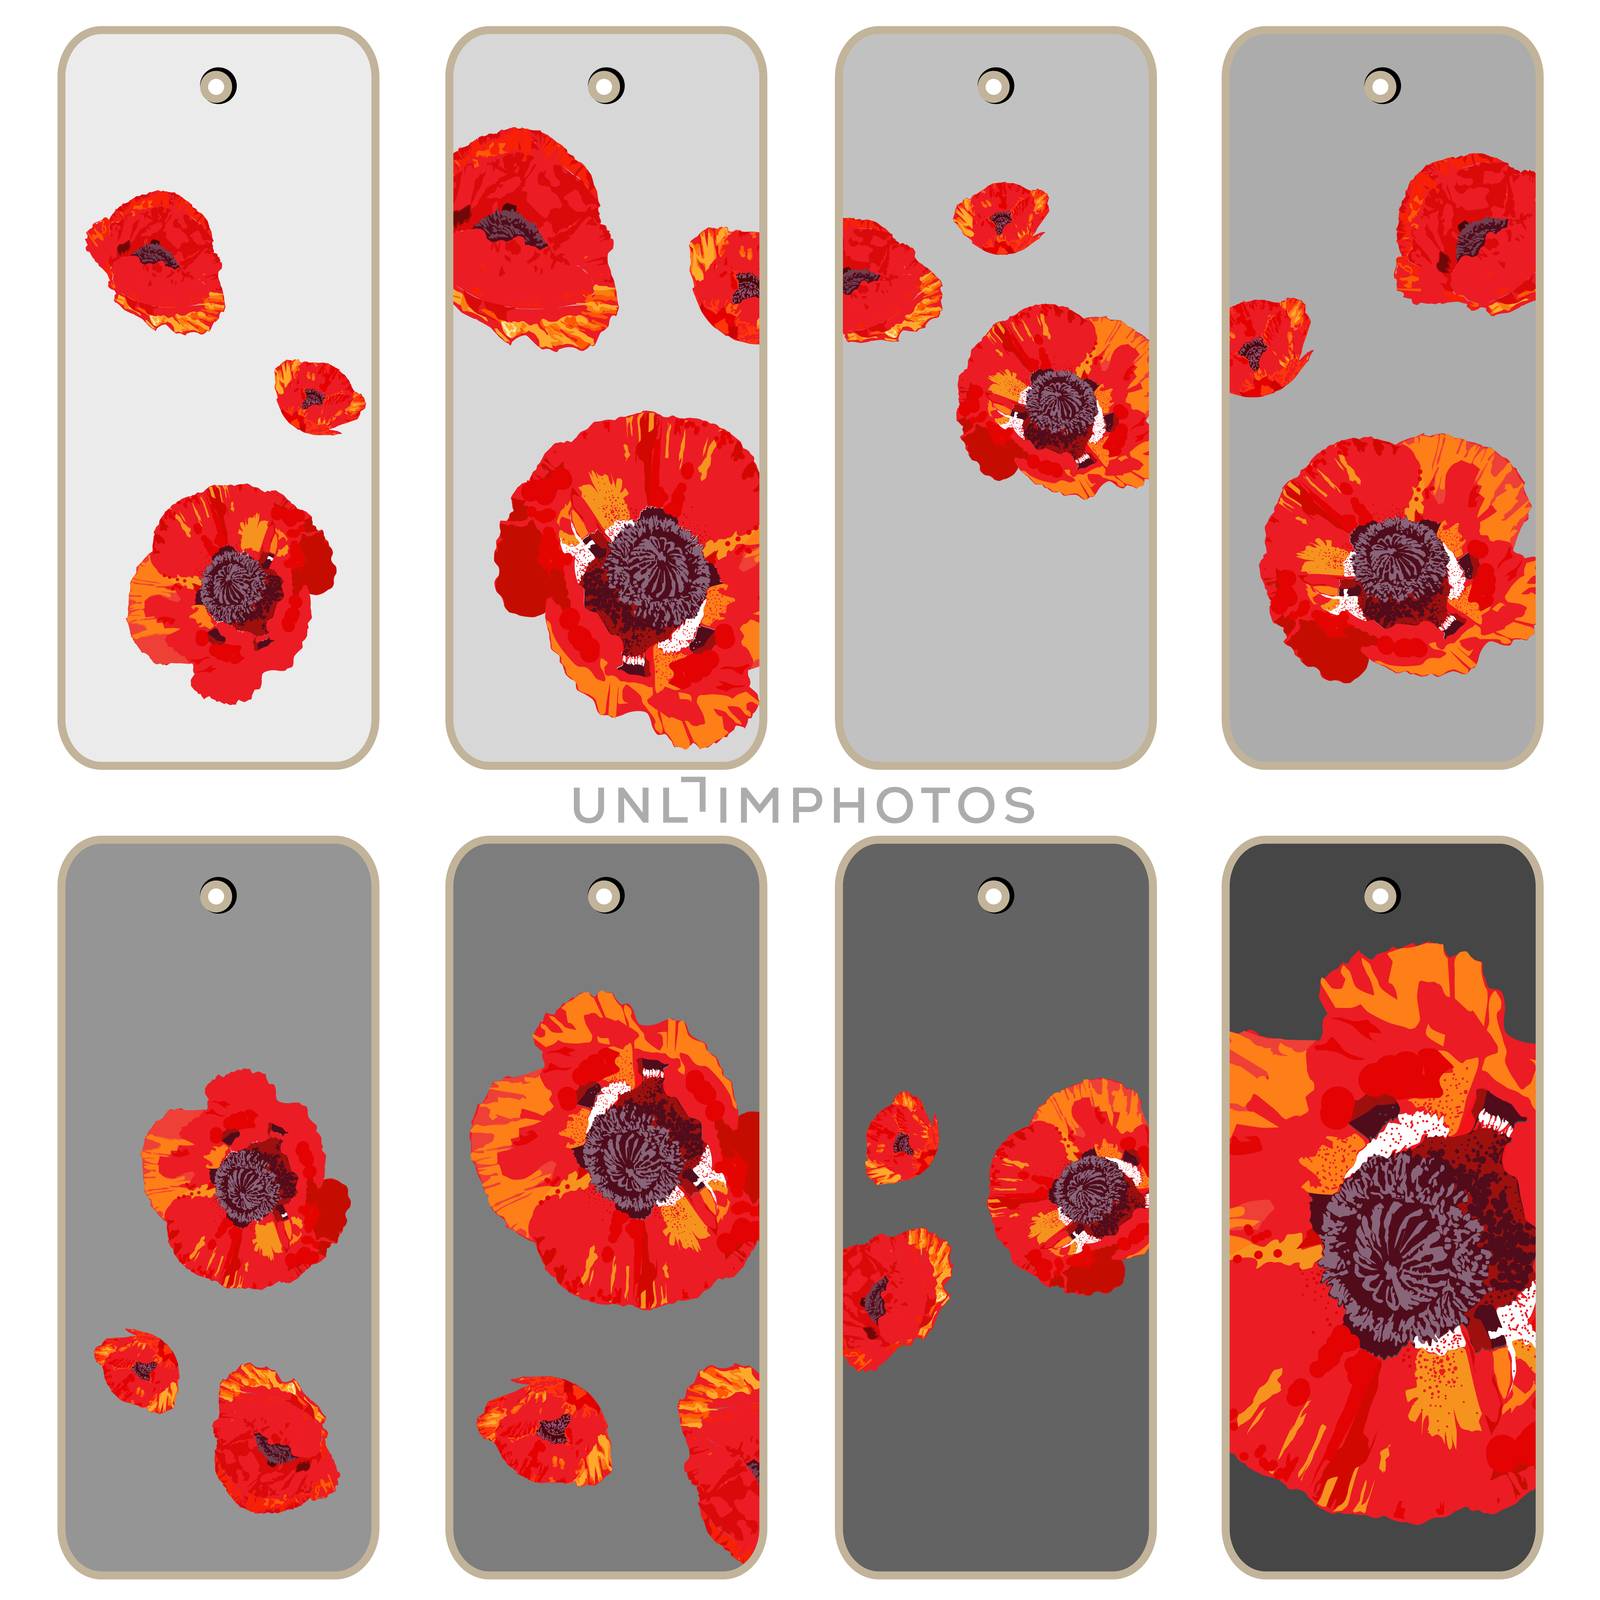 Price tags collection with poppy flowers, hand drawn cartoon illustrations over different grey backgrounds, series isolated on white